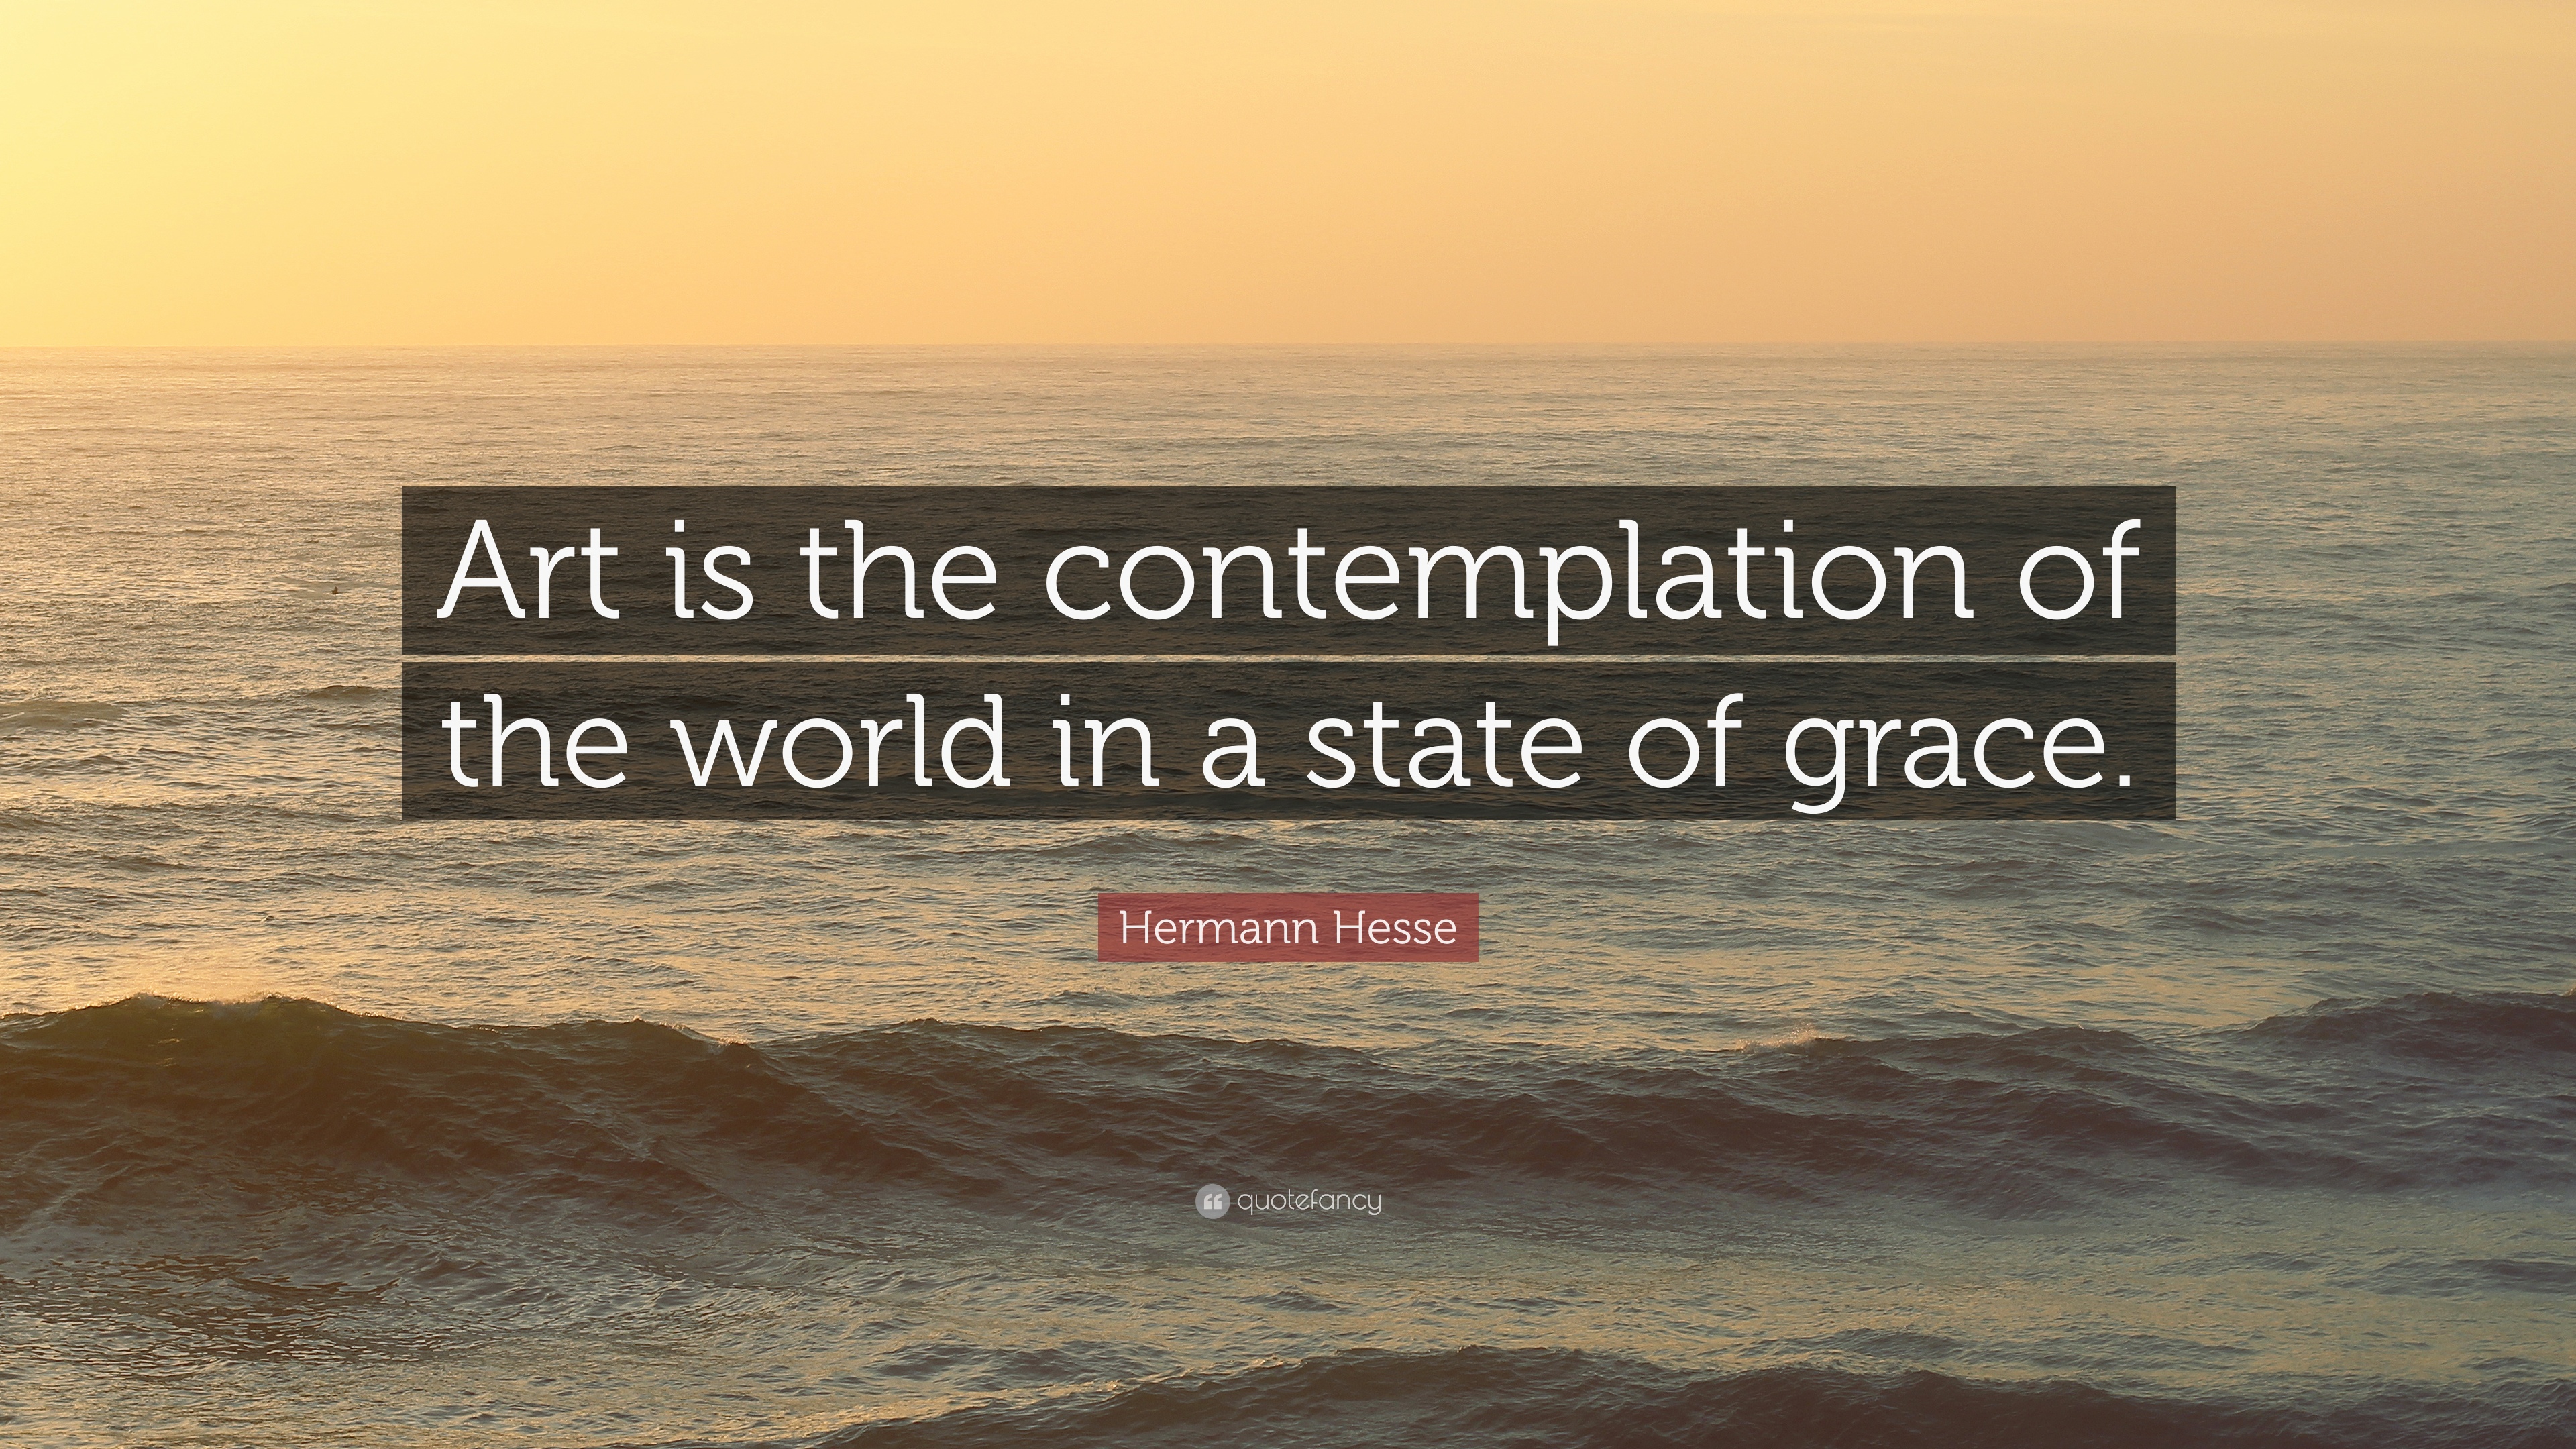 Hermann Hesse Quote: “Art is the contemplation of the world in a ...